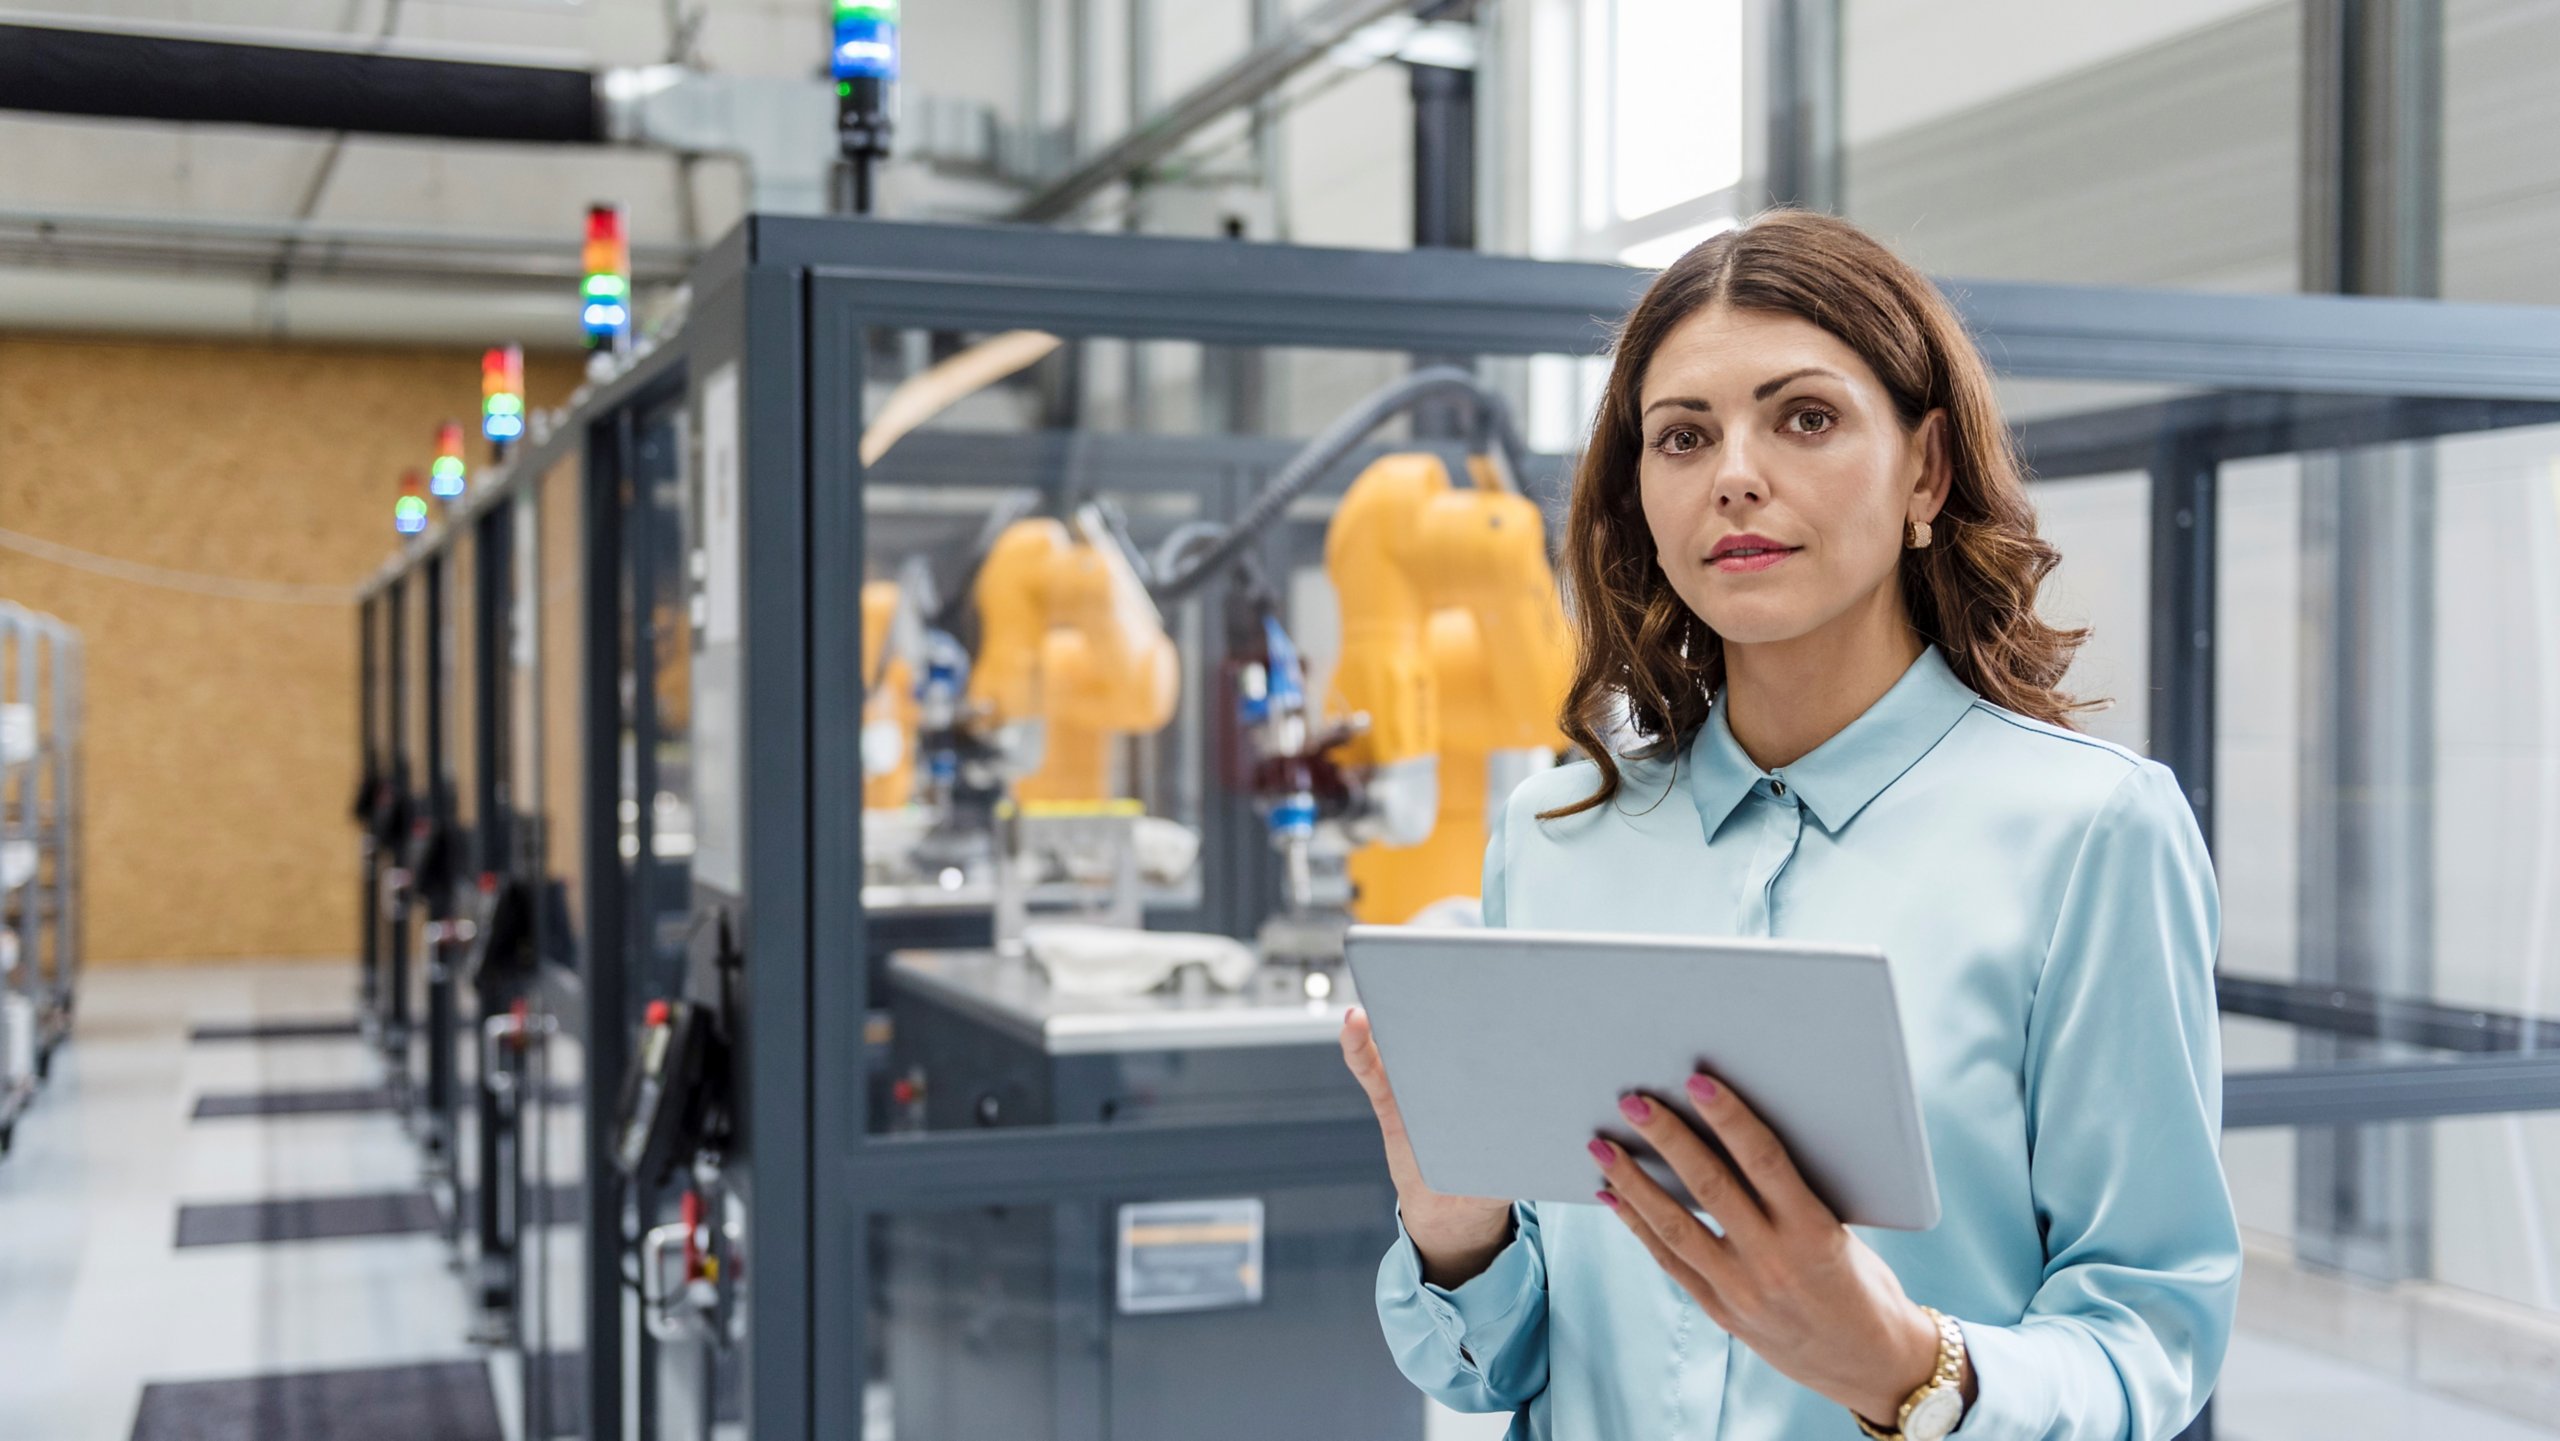 Business woman holding tablet device and standing near manufacturing equipment